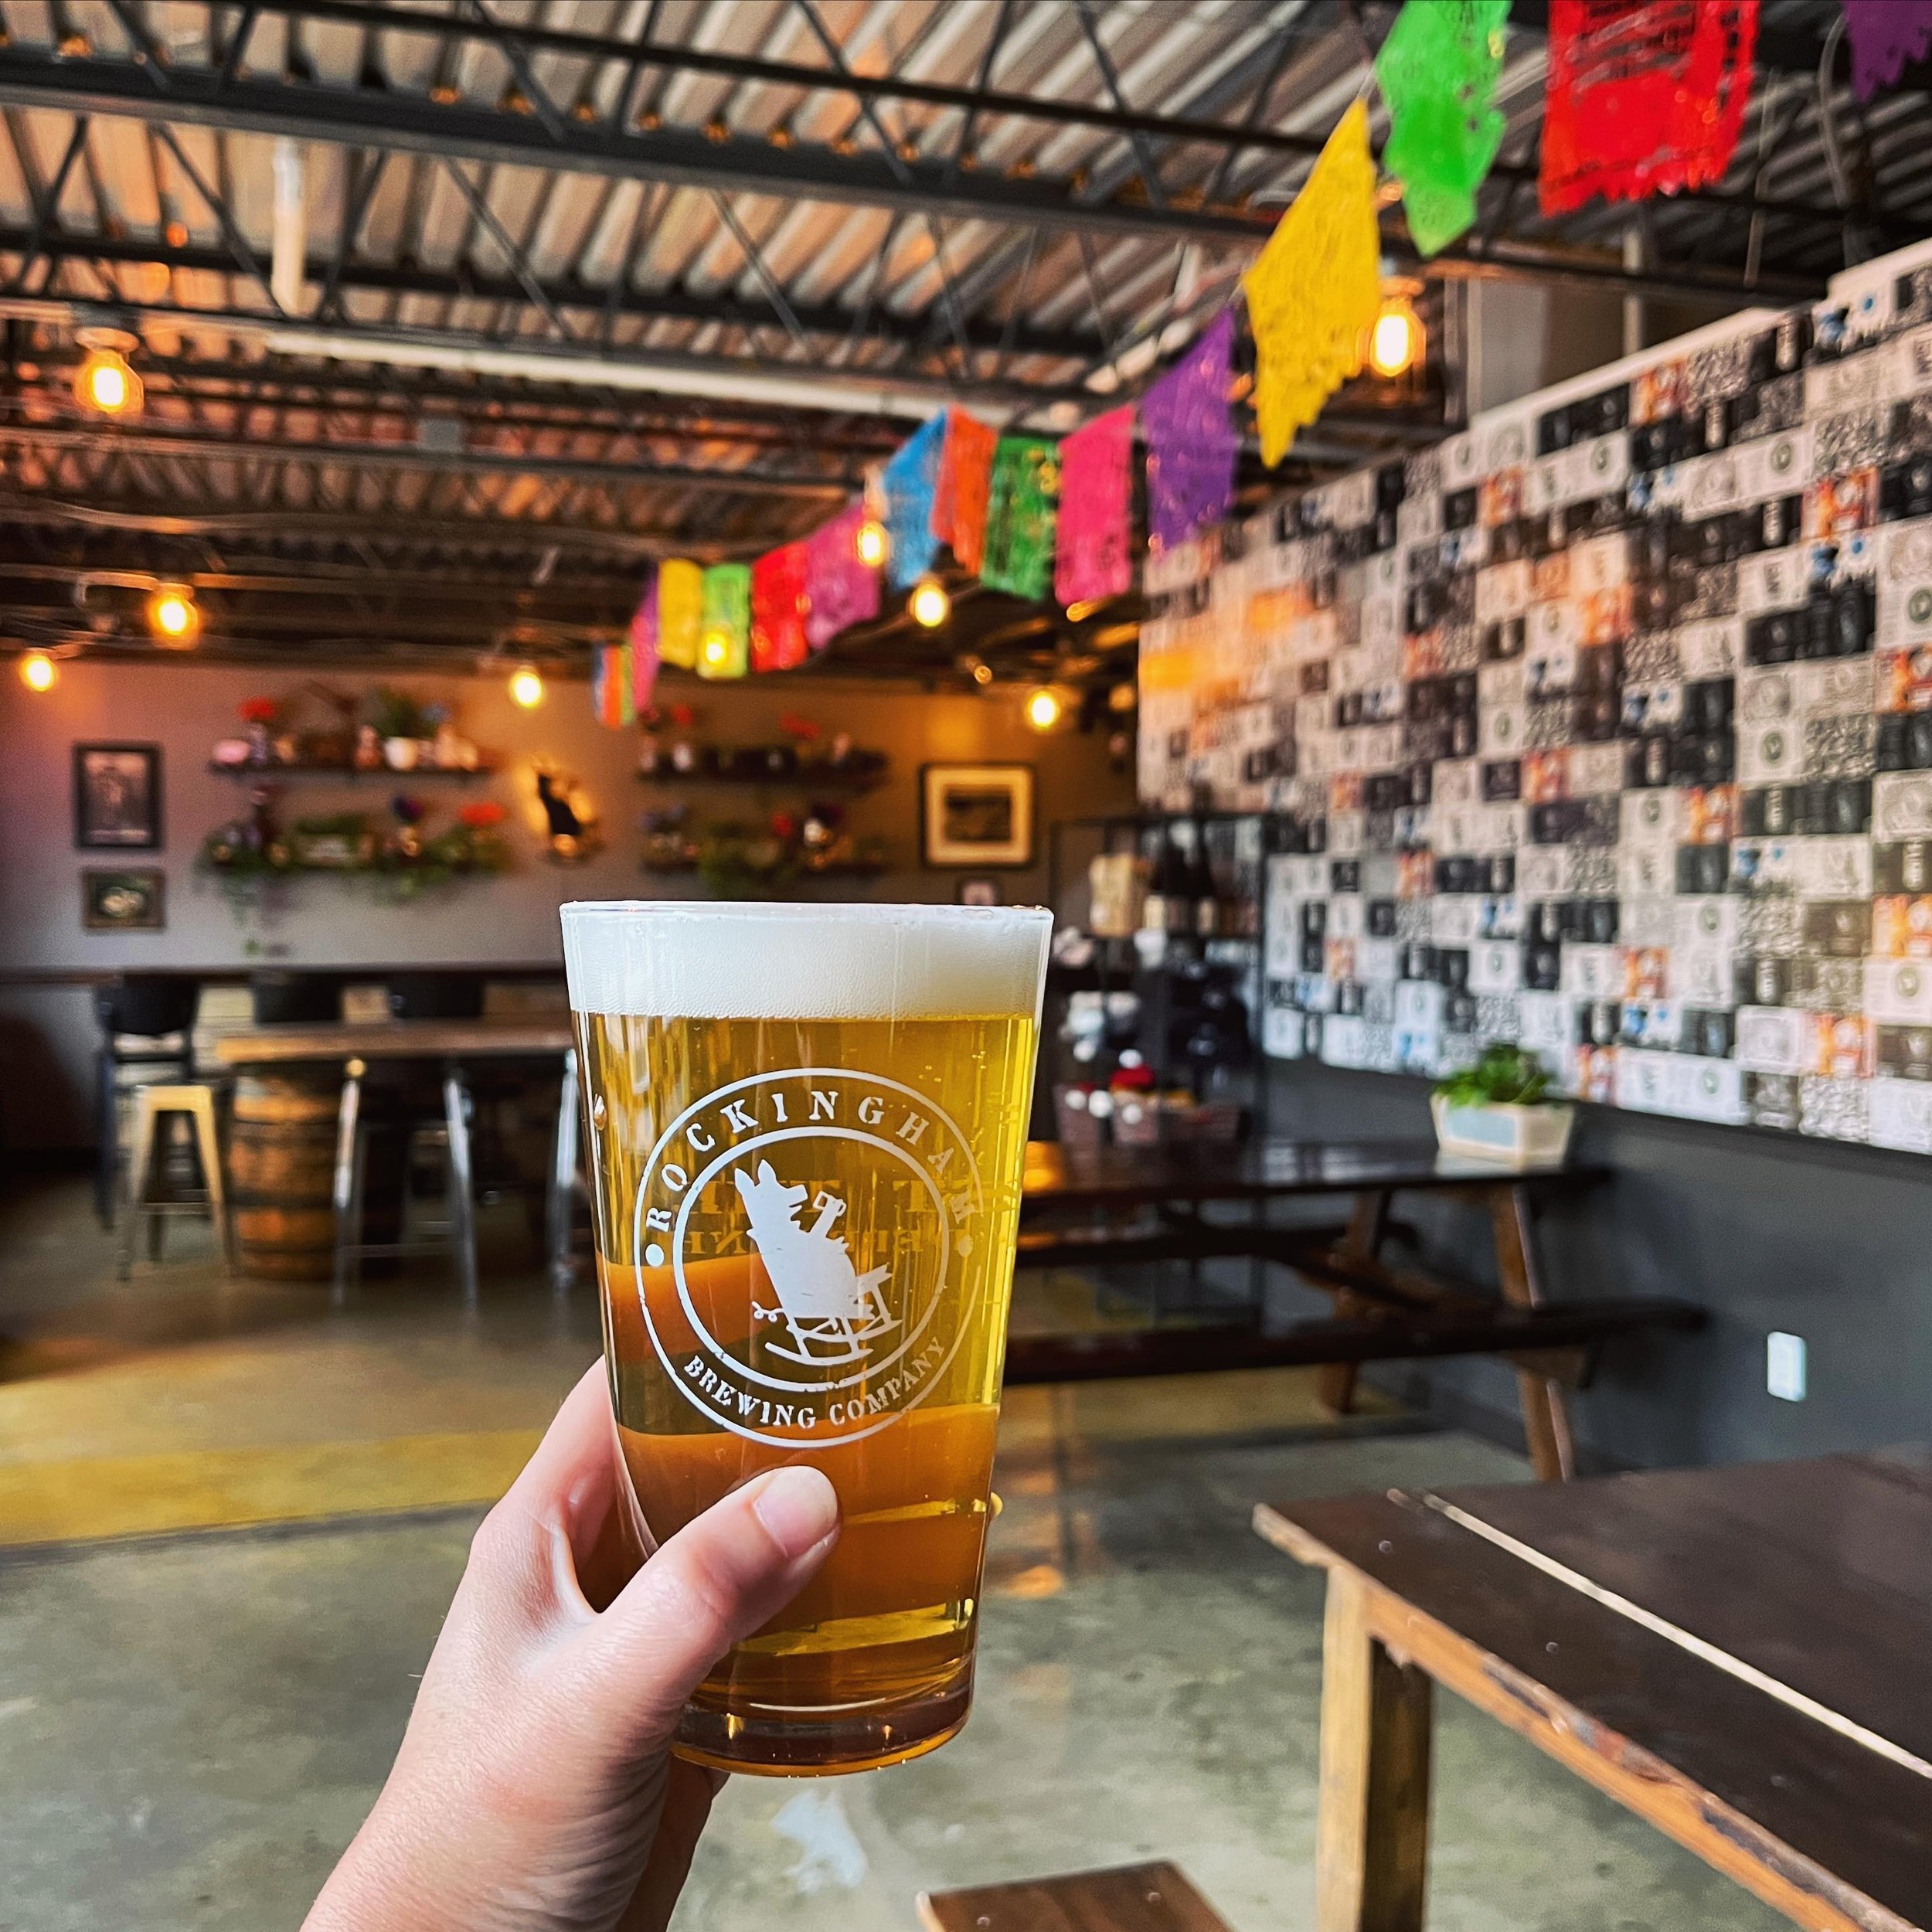 With 5 Mexican-inspired beers on tap (including some serious fan favorites) &amp; @iberianempanadas in the house.. we are Cinco Sunday ready! Open 1-6p!